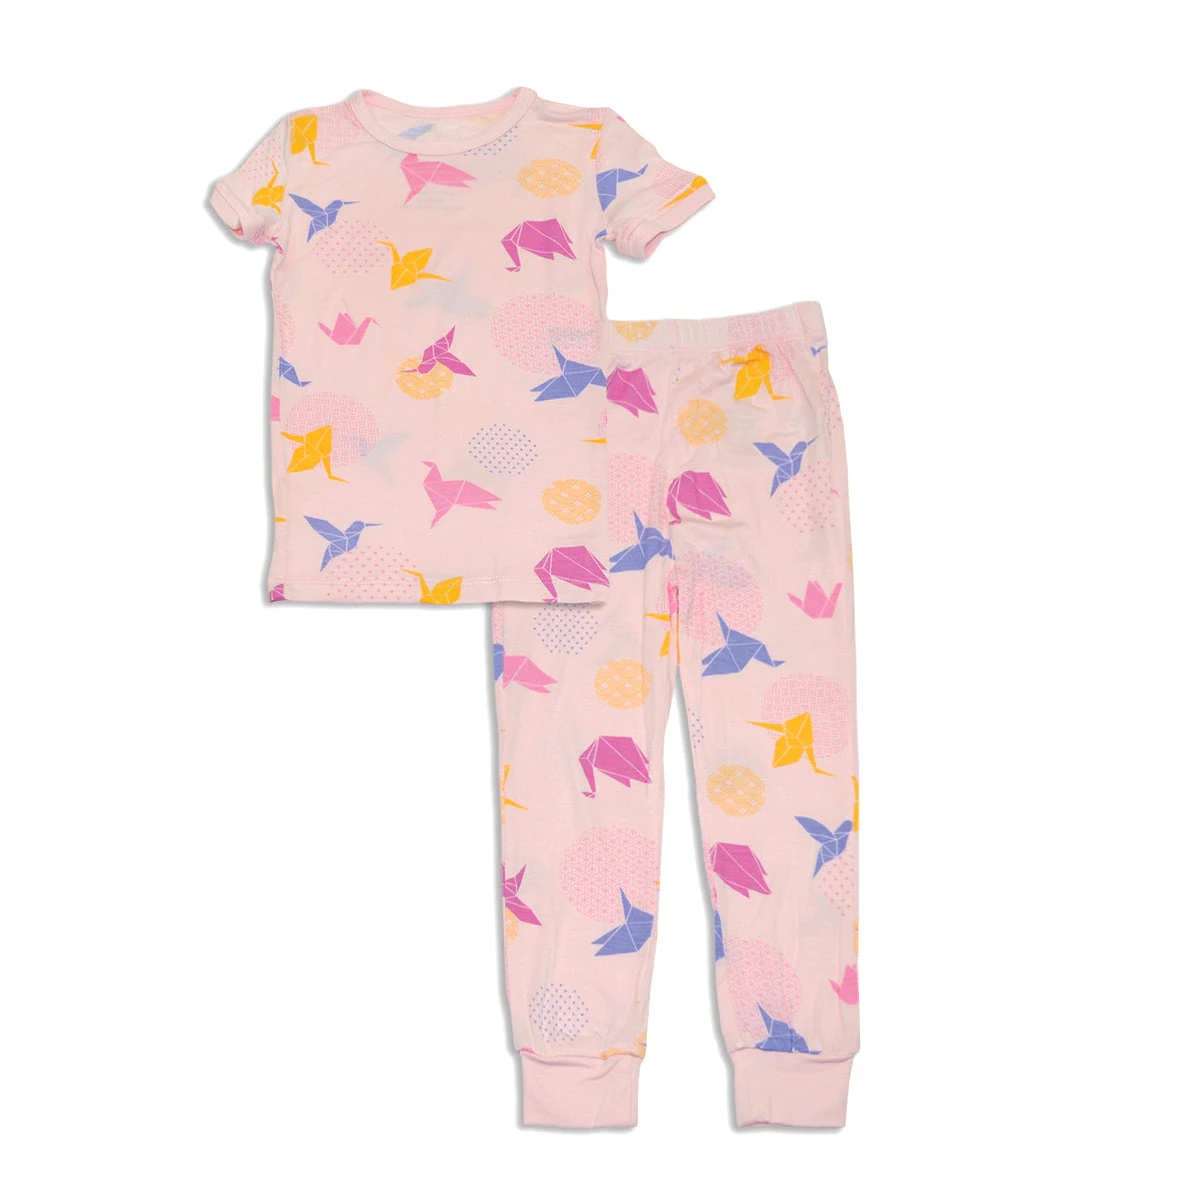 Silkberry Baby bamboo short sleeve pajama set for toddlers and kids